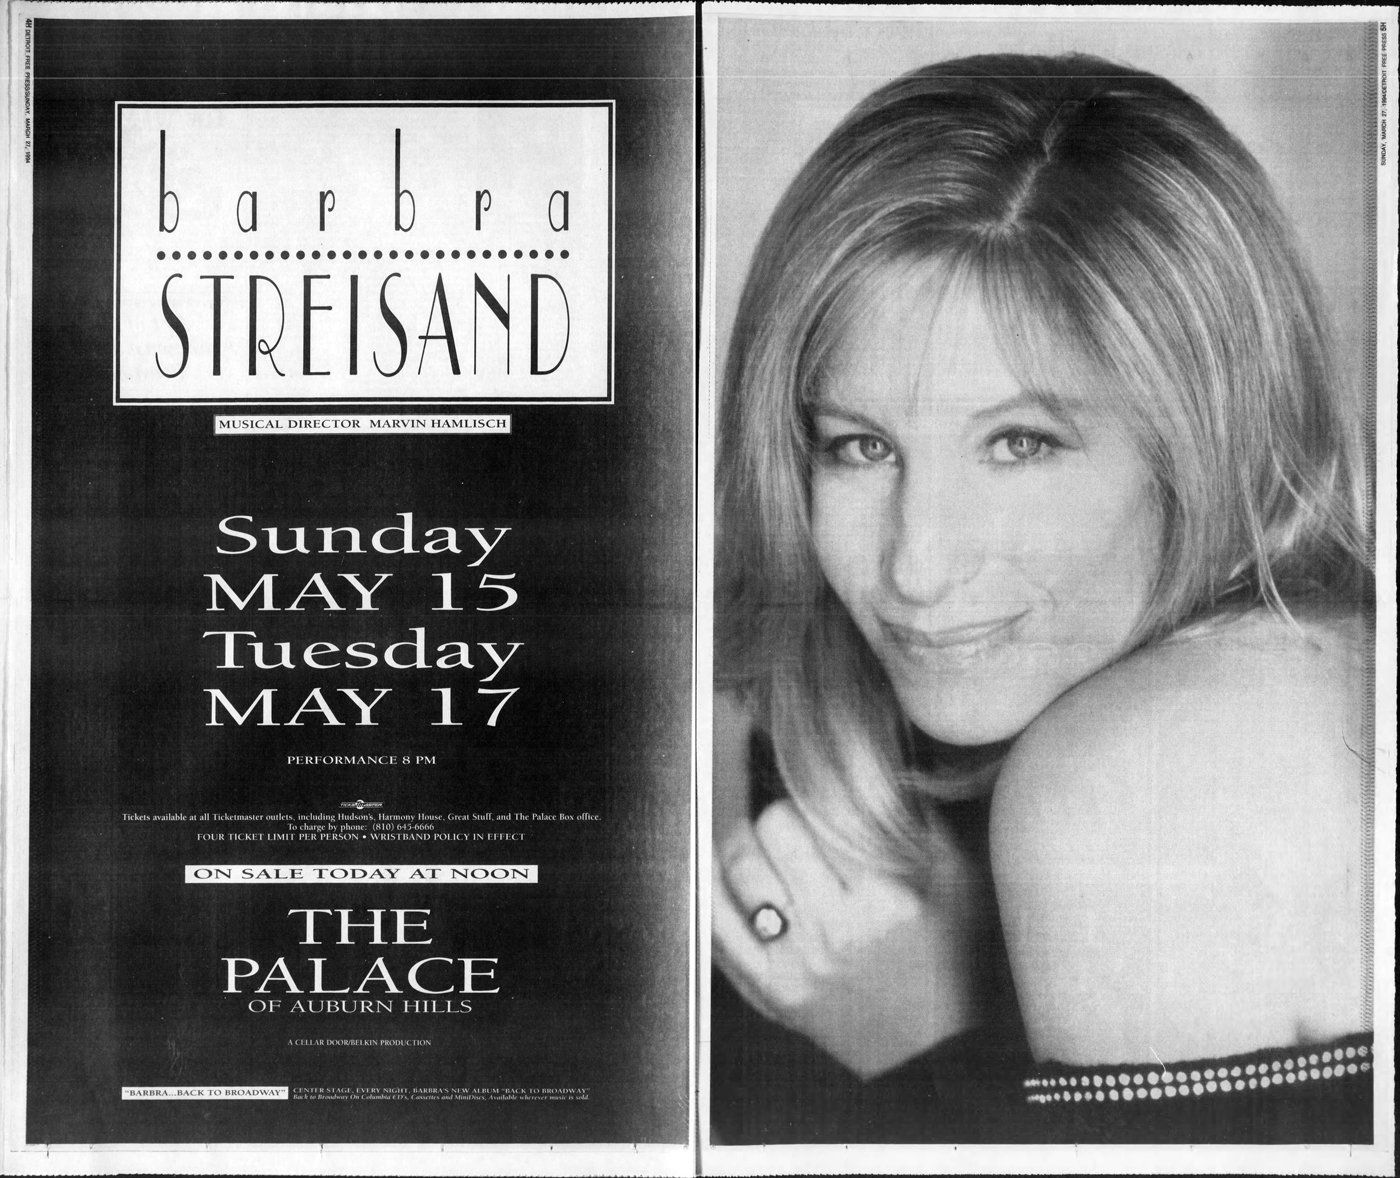 Double truck (two-page) ad for Streisand tickets at the Palace.